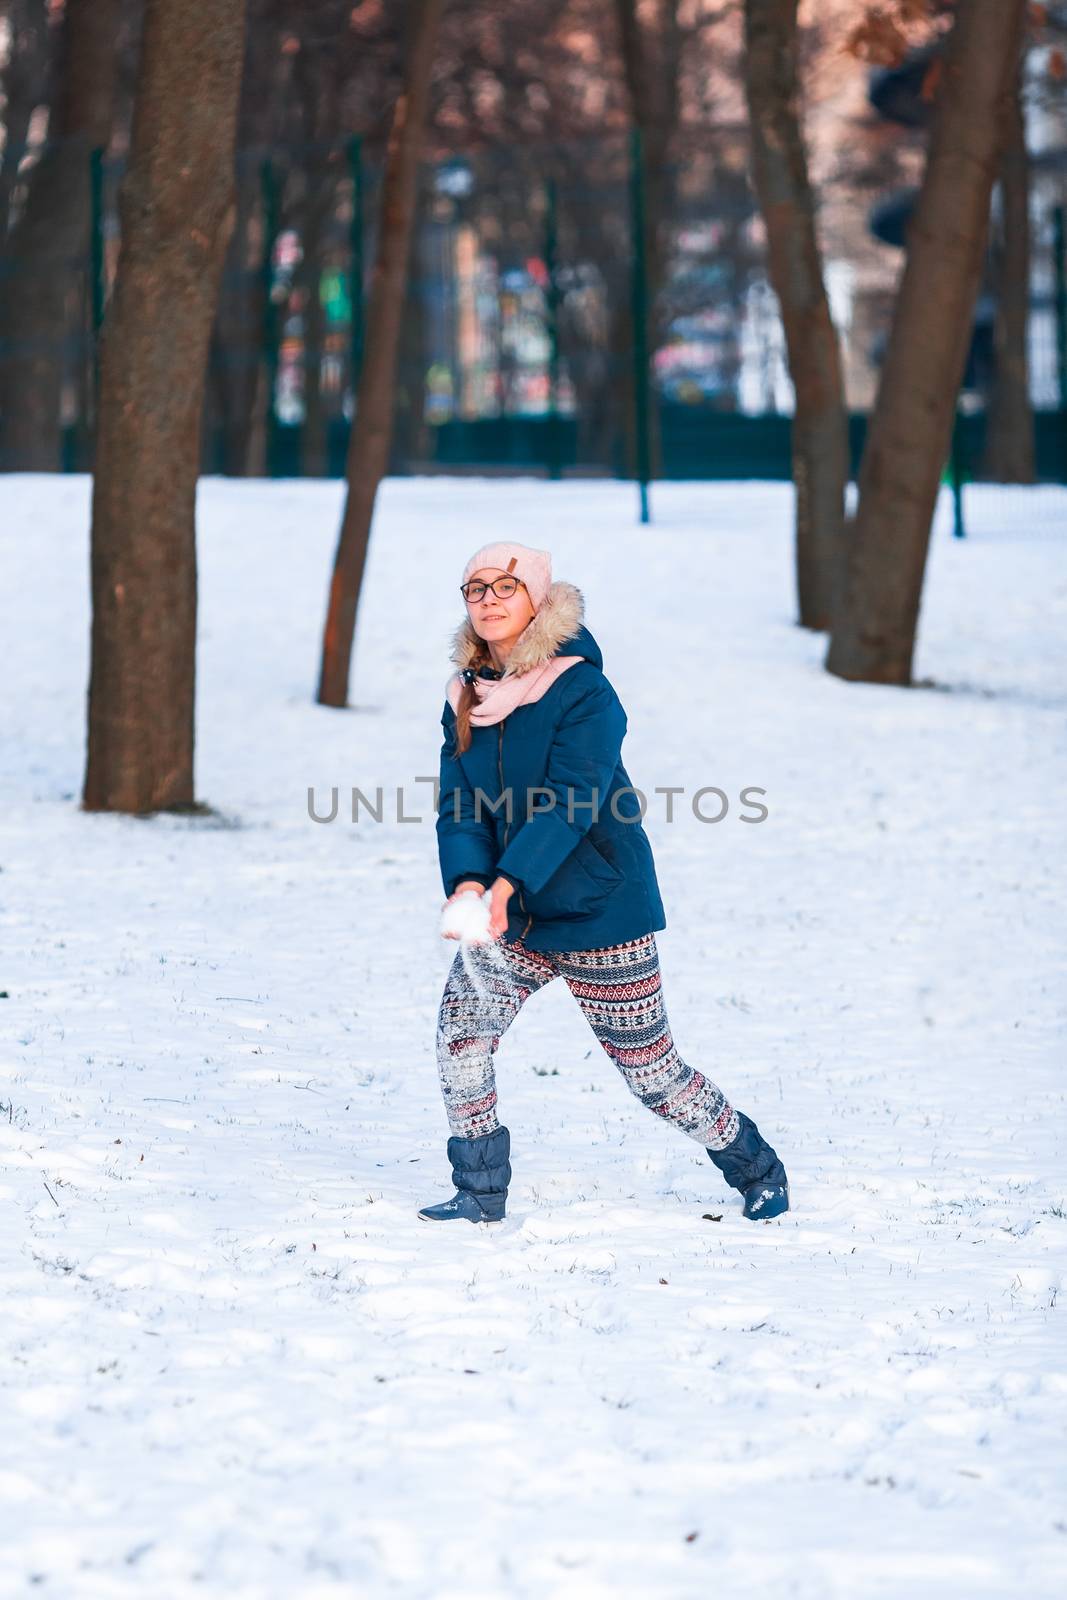 Happy teenage girl having a snowball fight, ready to throw a snowball, playing snowballs in winter park